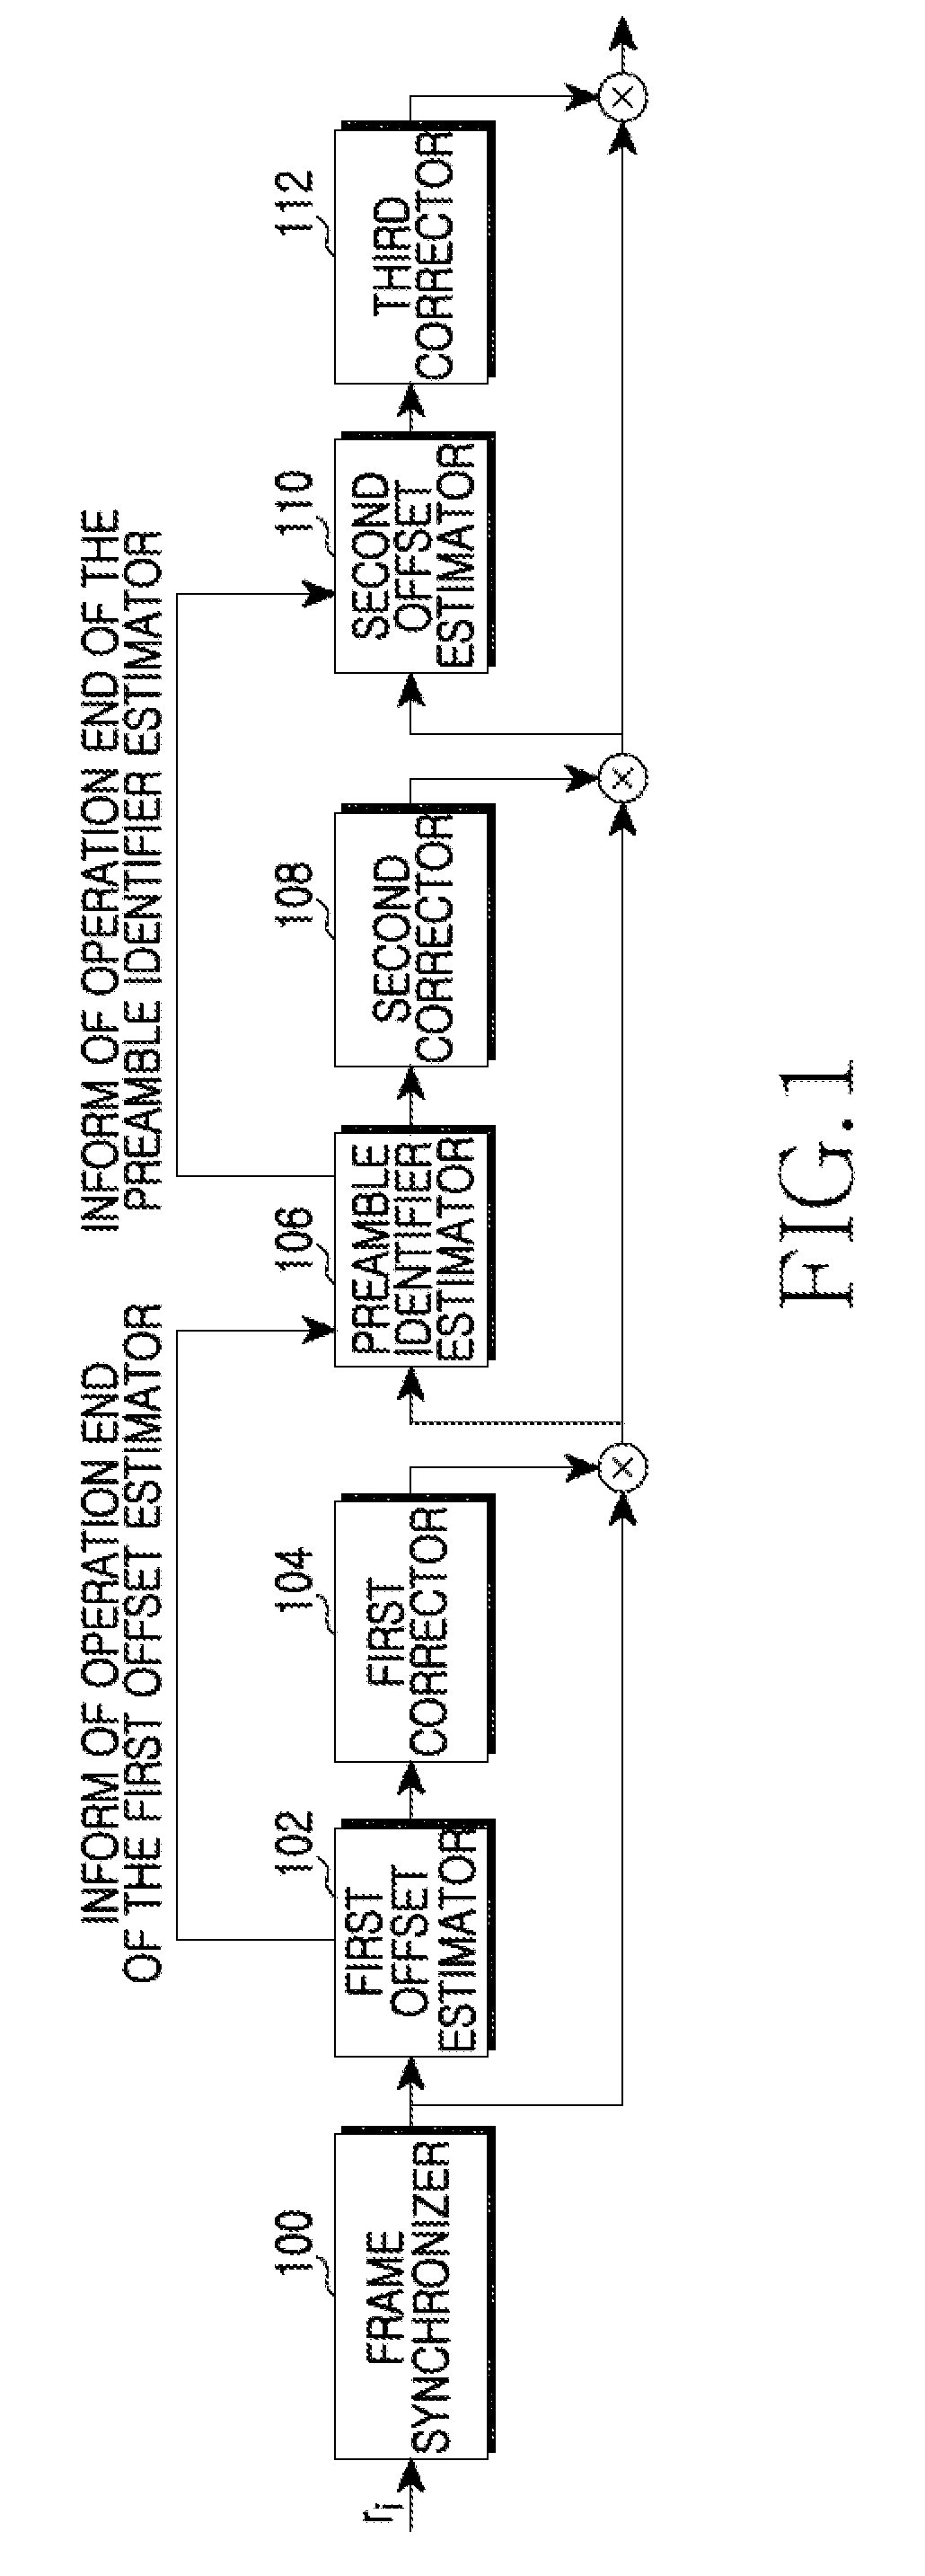 Apparatus and method for initial synchronization in wireless communication system based on OFDM